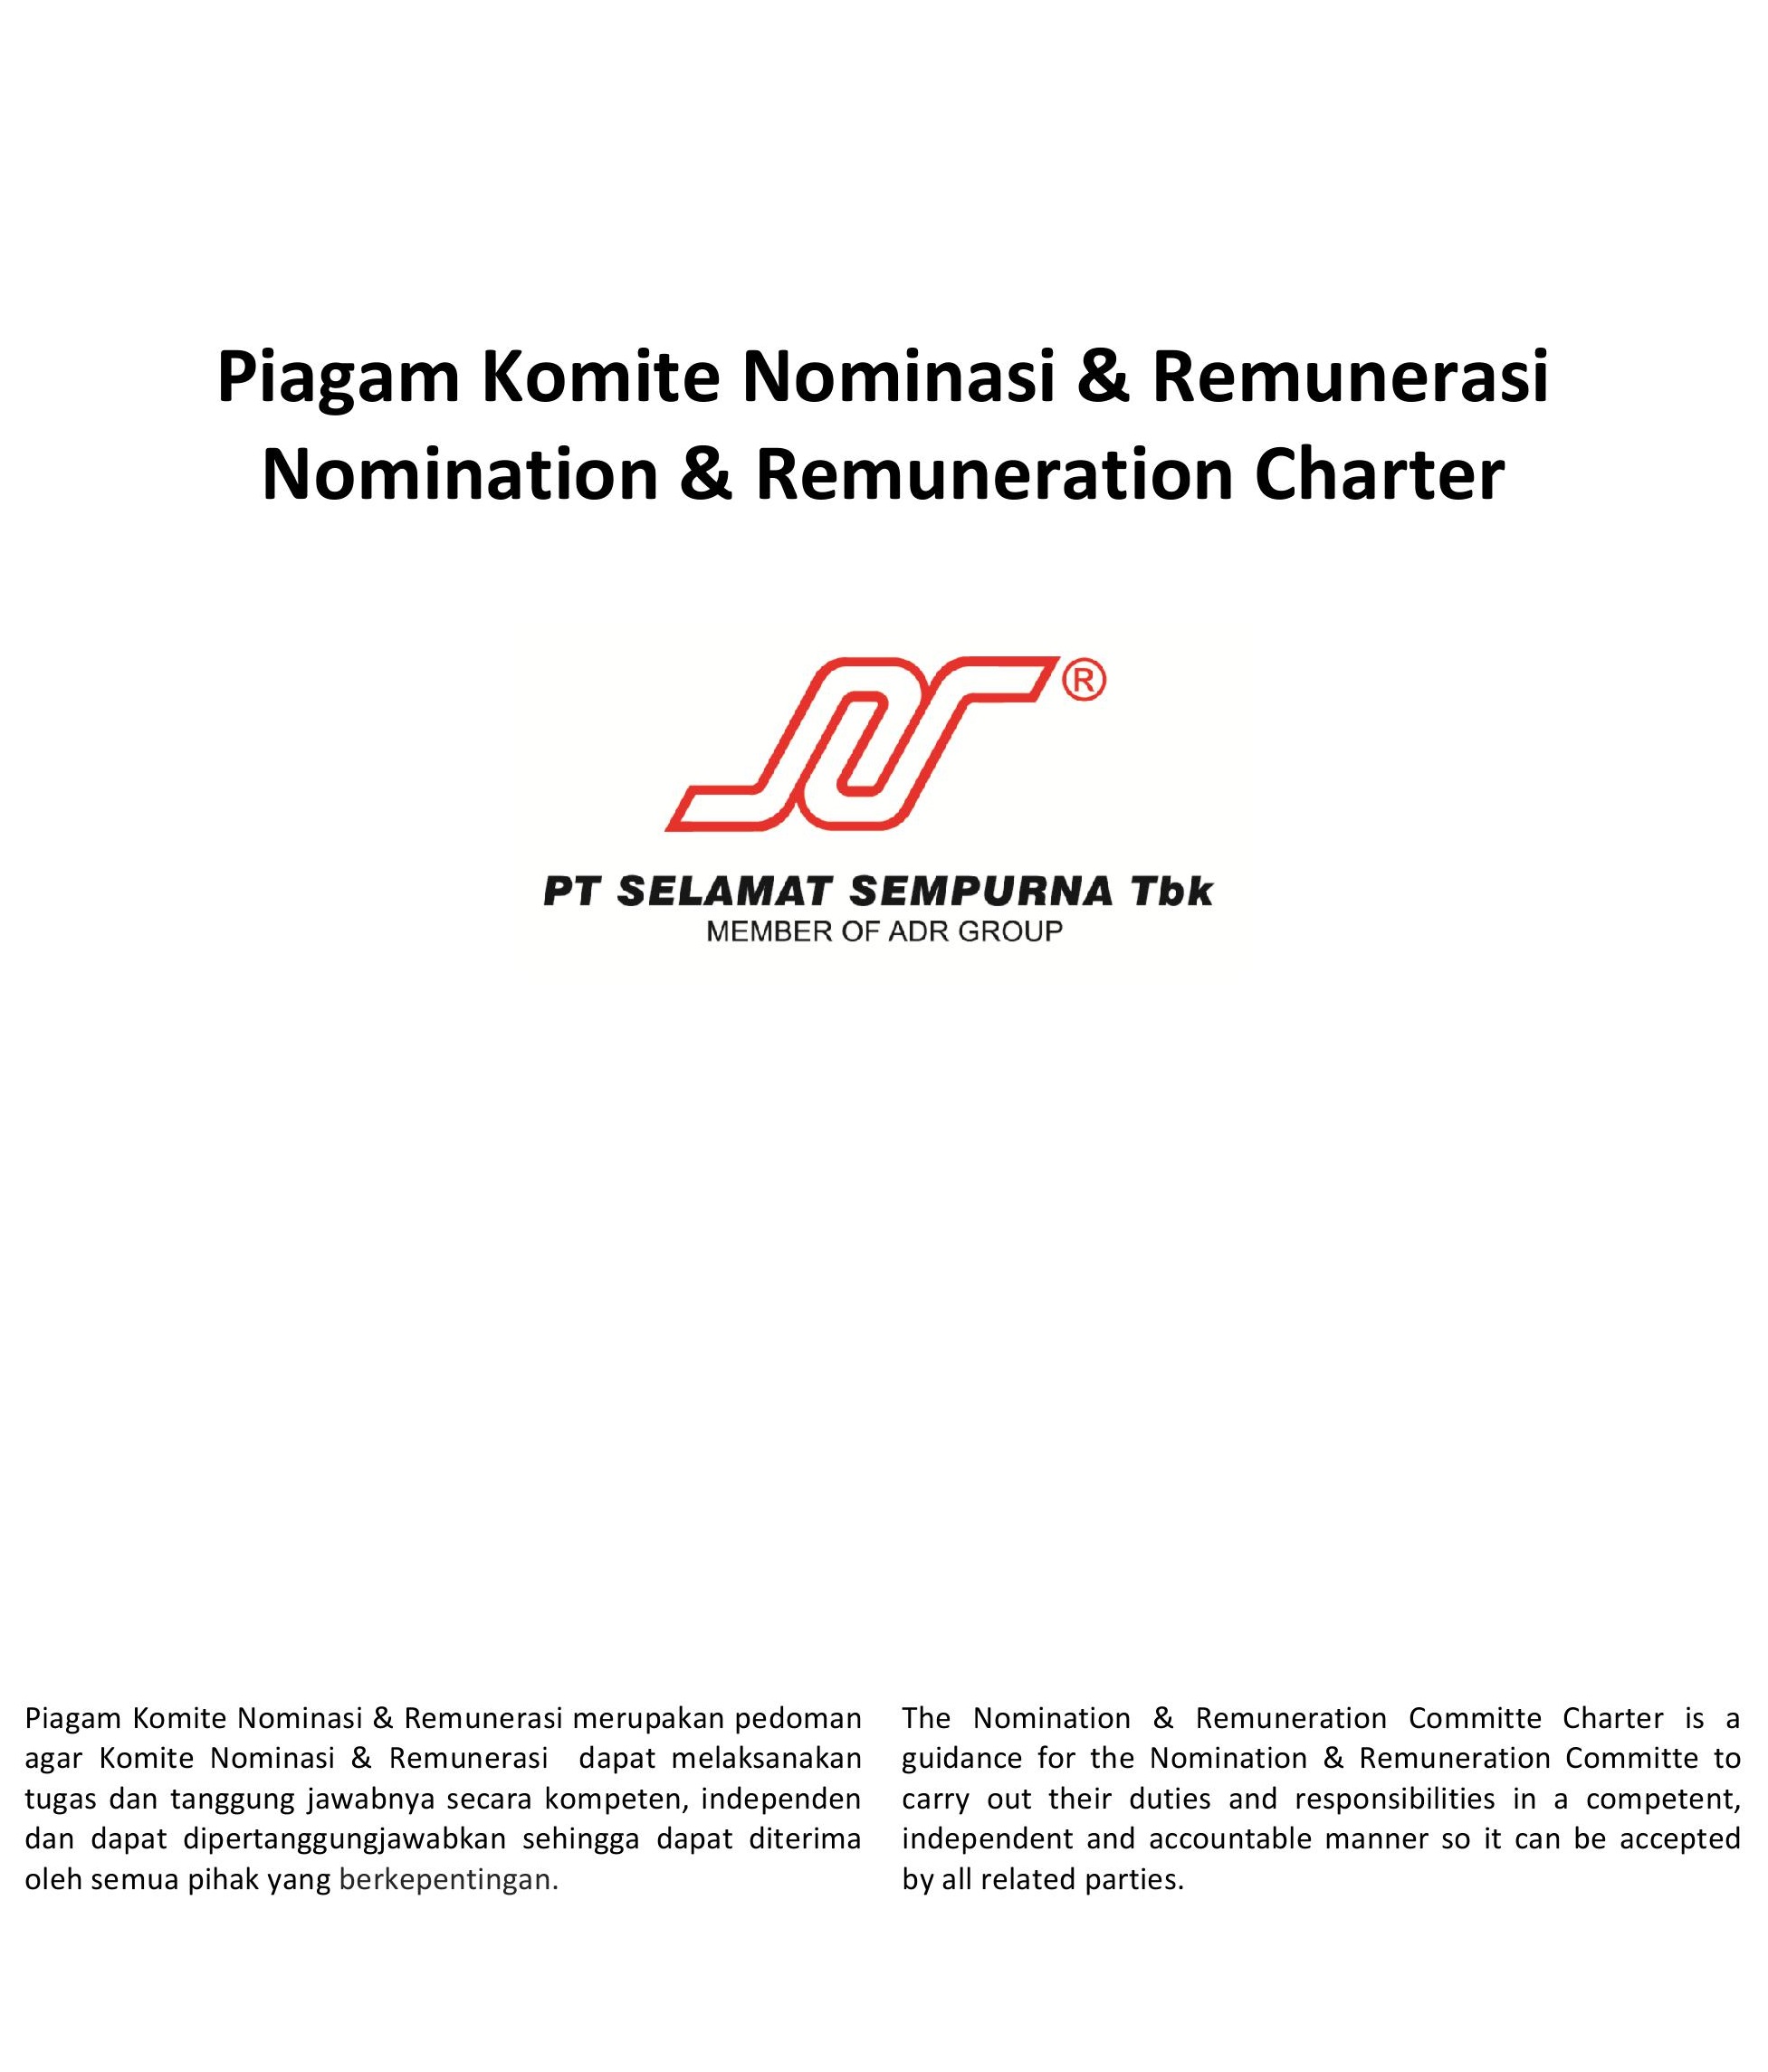 Charter of The Nomination & Remuneration Committee